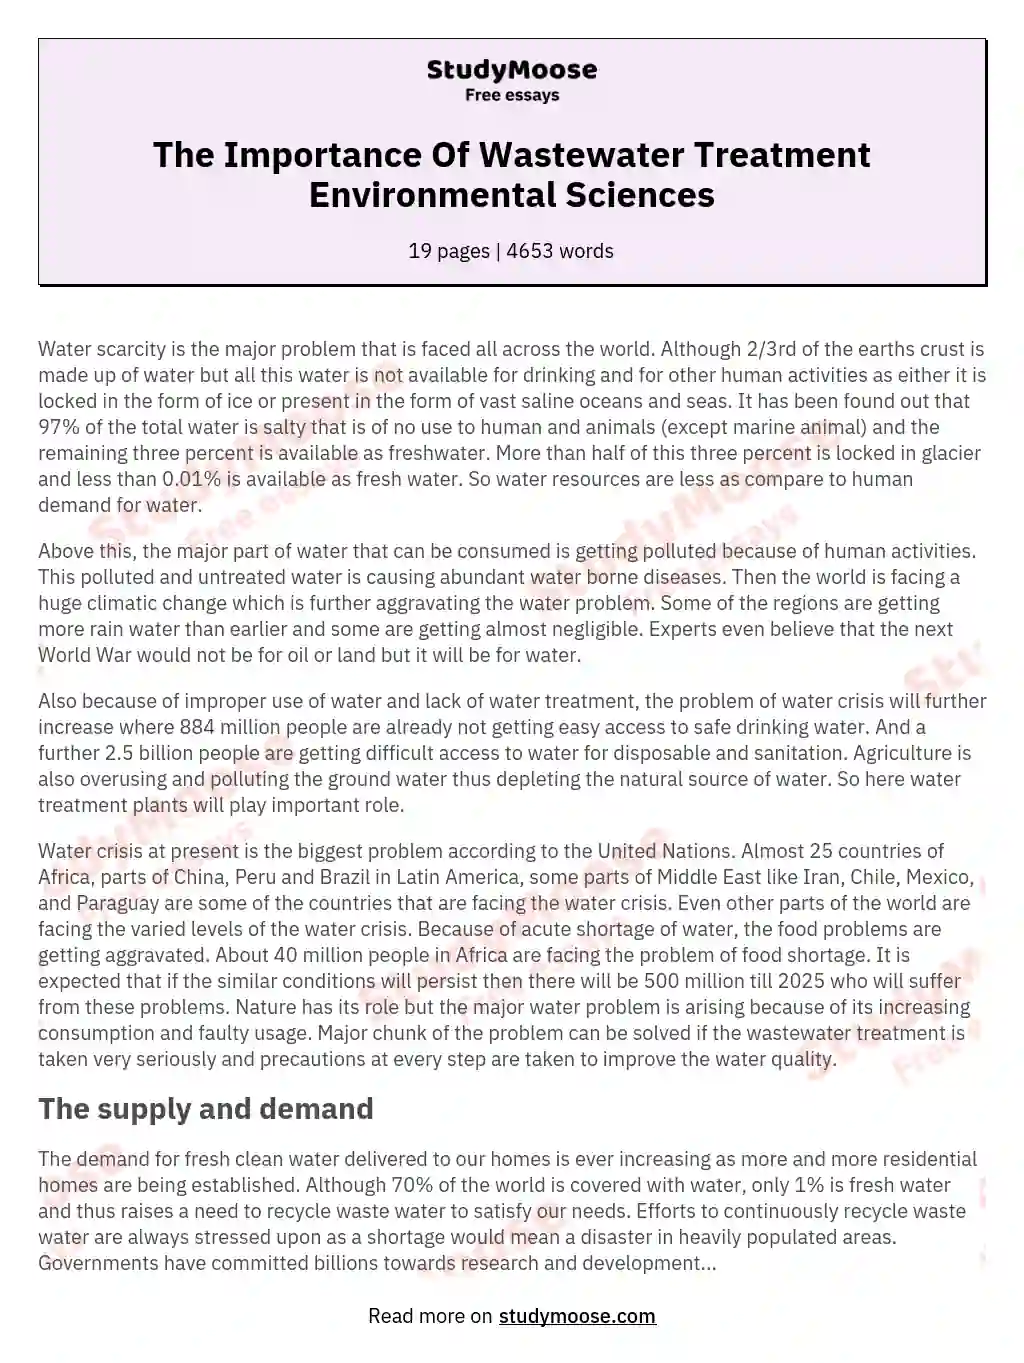 wasting water essay